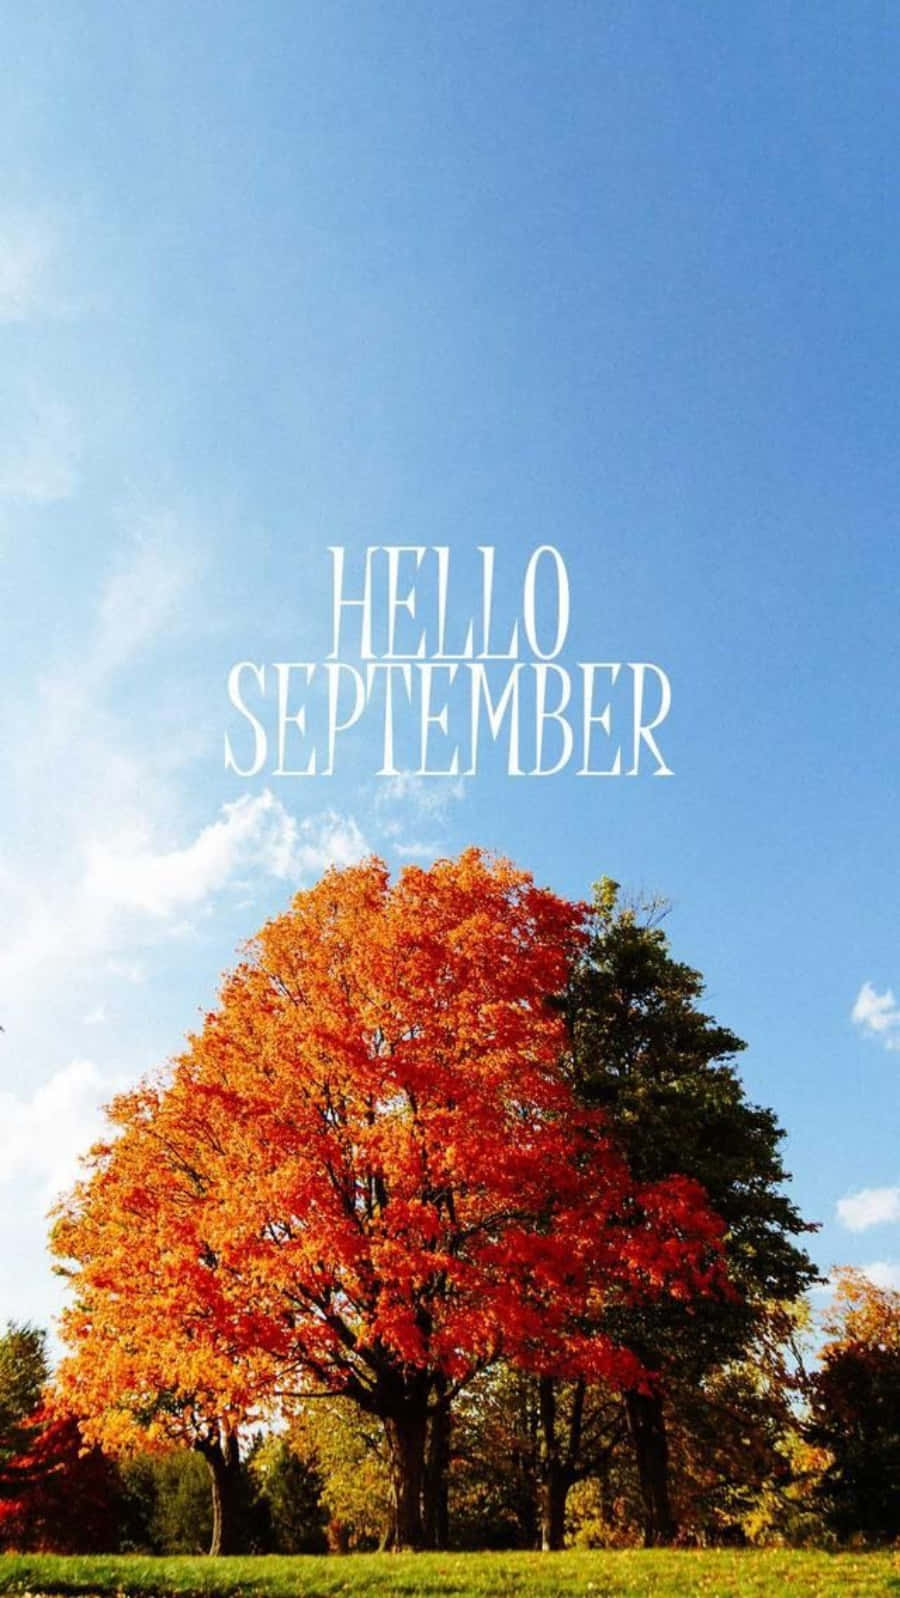 Big Autumn Tree With Hello September Greeting Wallpaper